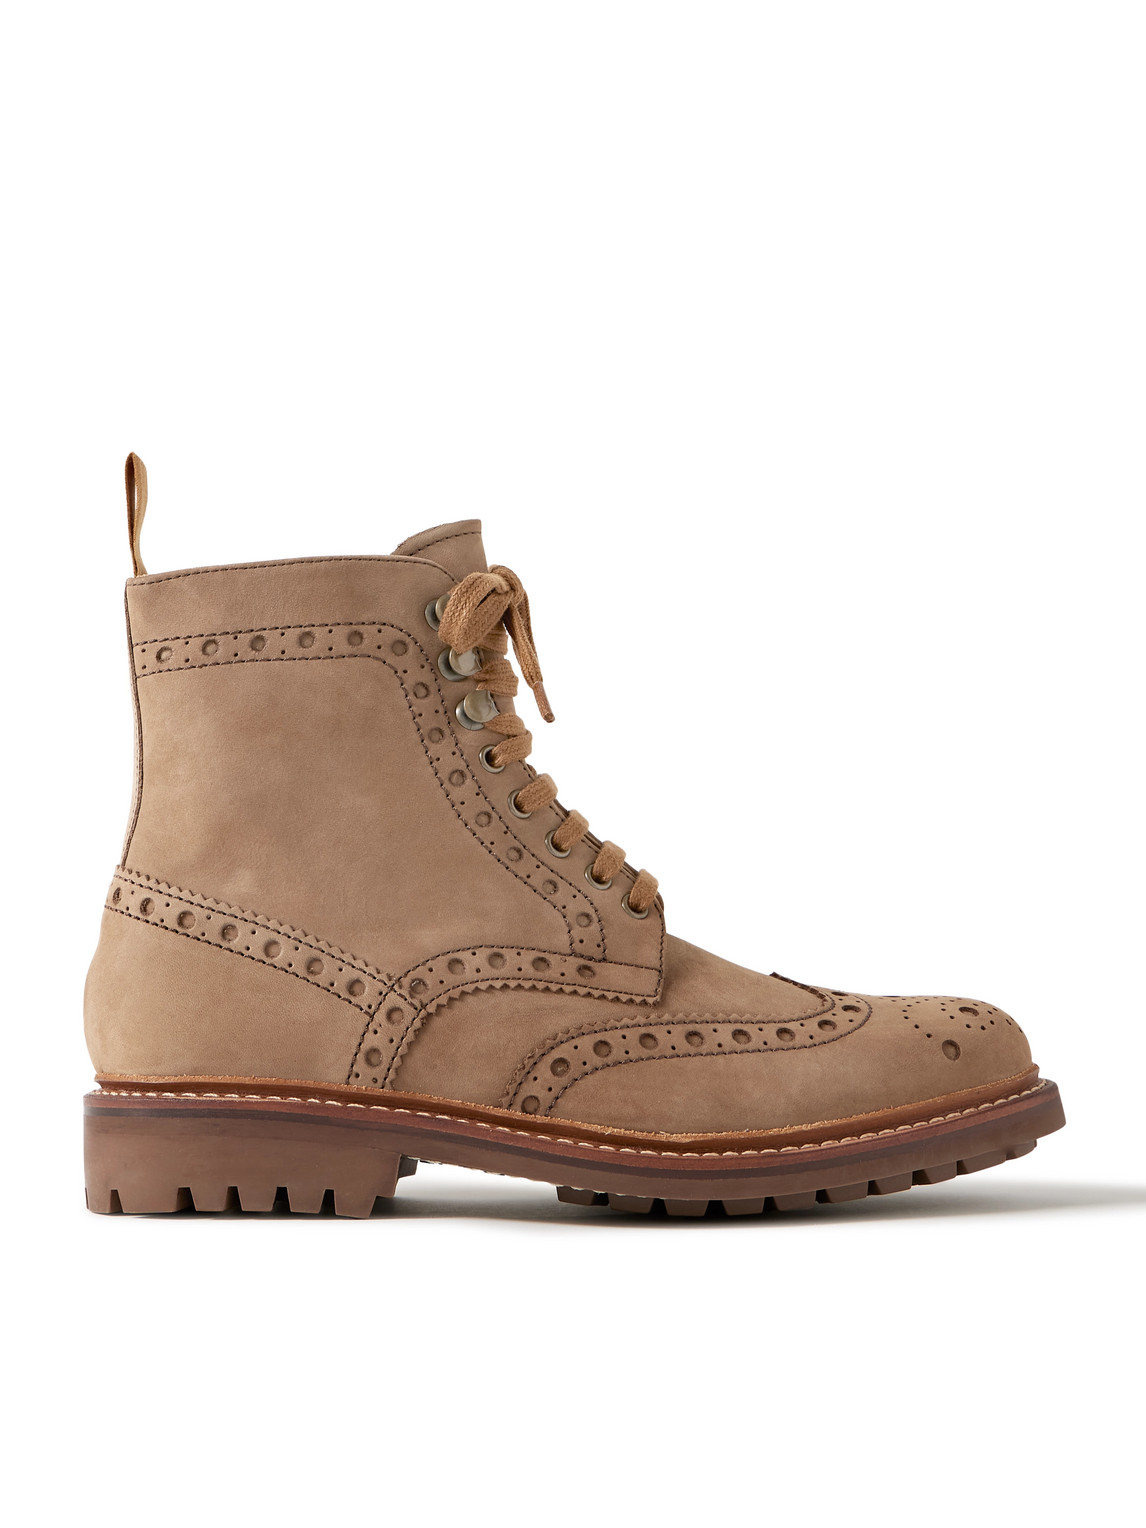 Grenson Fred Nubuck Brouge Boots In Brown